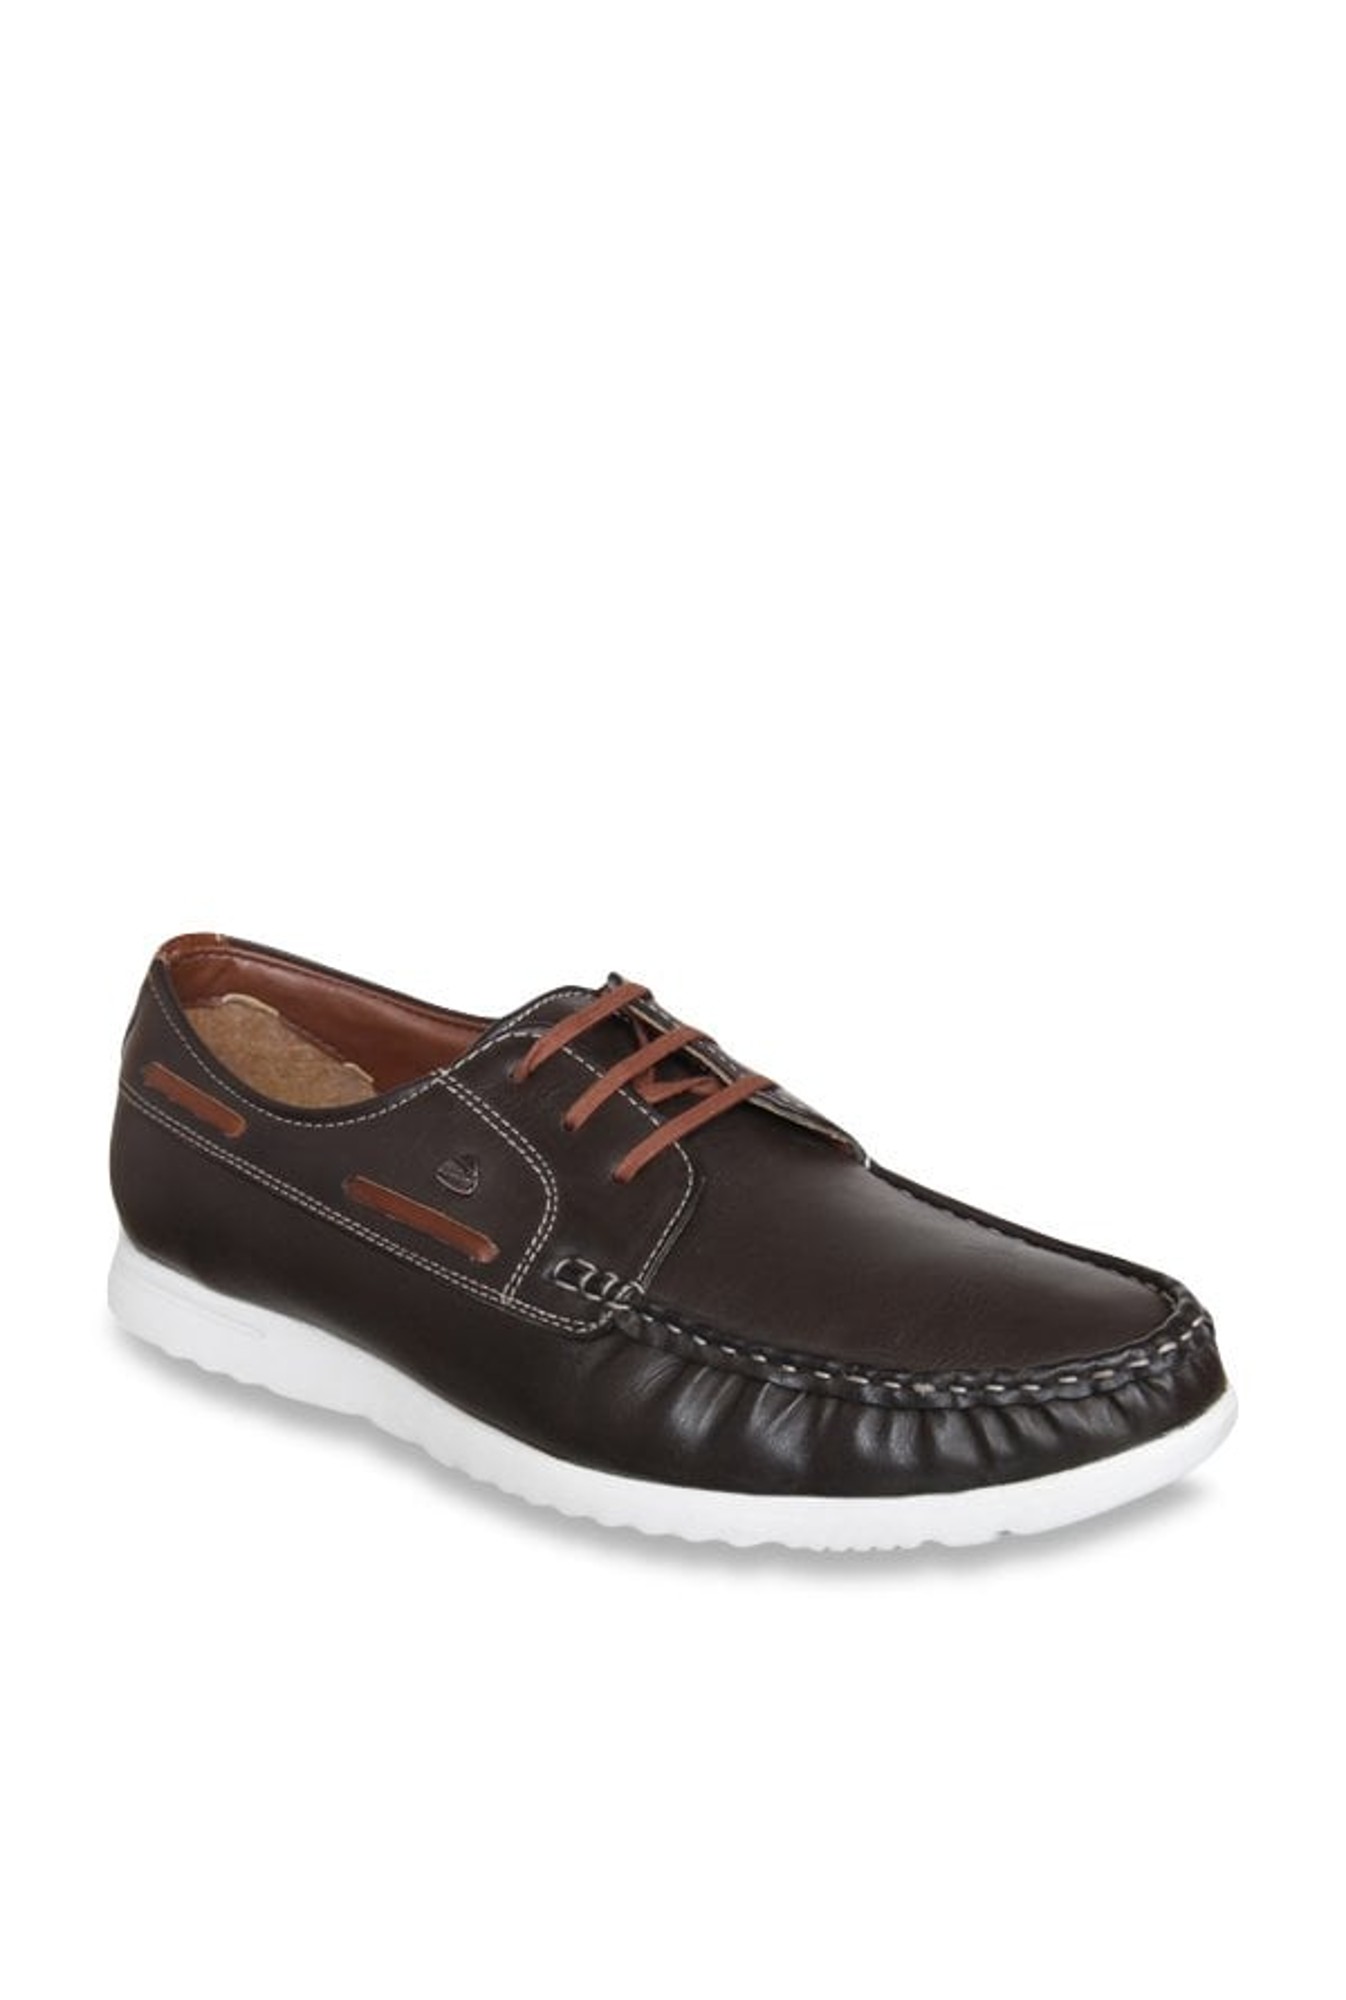 Hush Puppies DUKE Mens Leather Touch Fasten Wide Fit | Ubuy Ghana